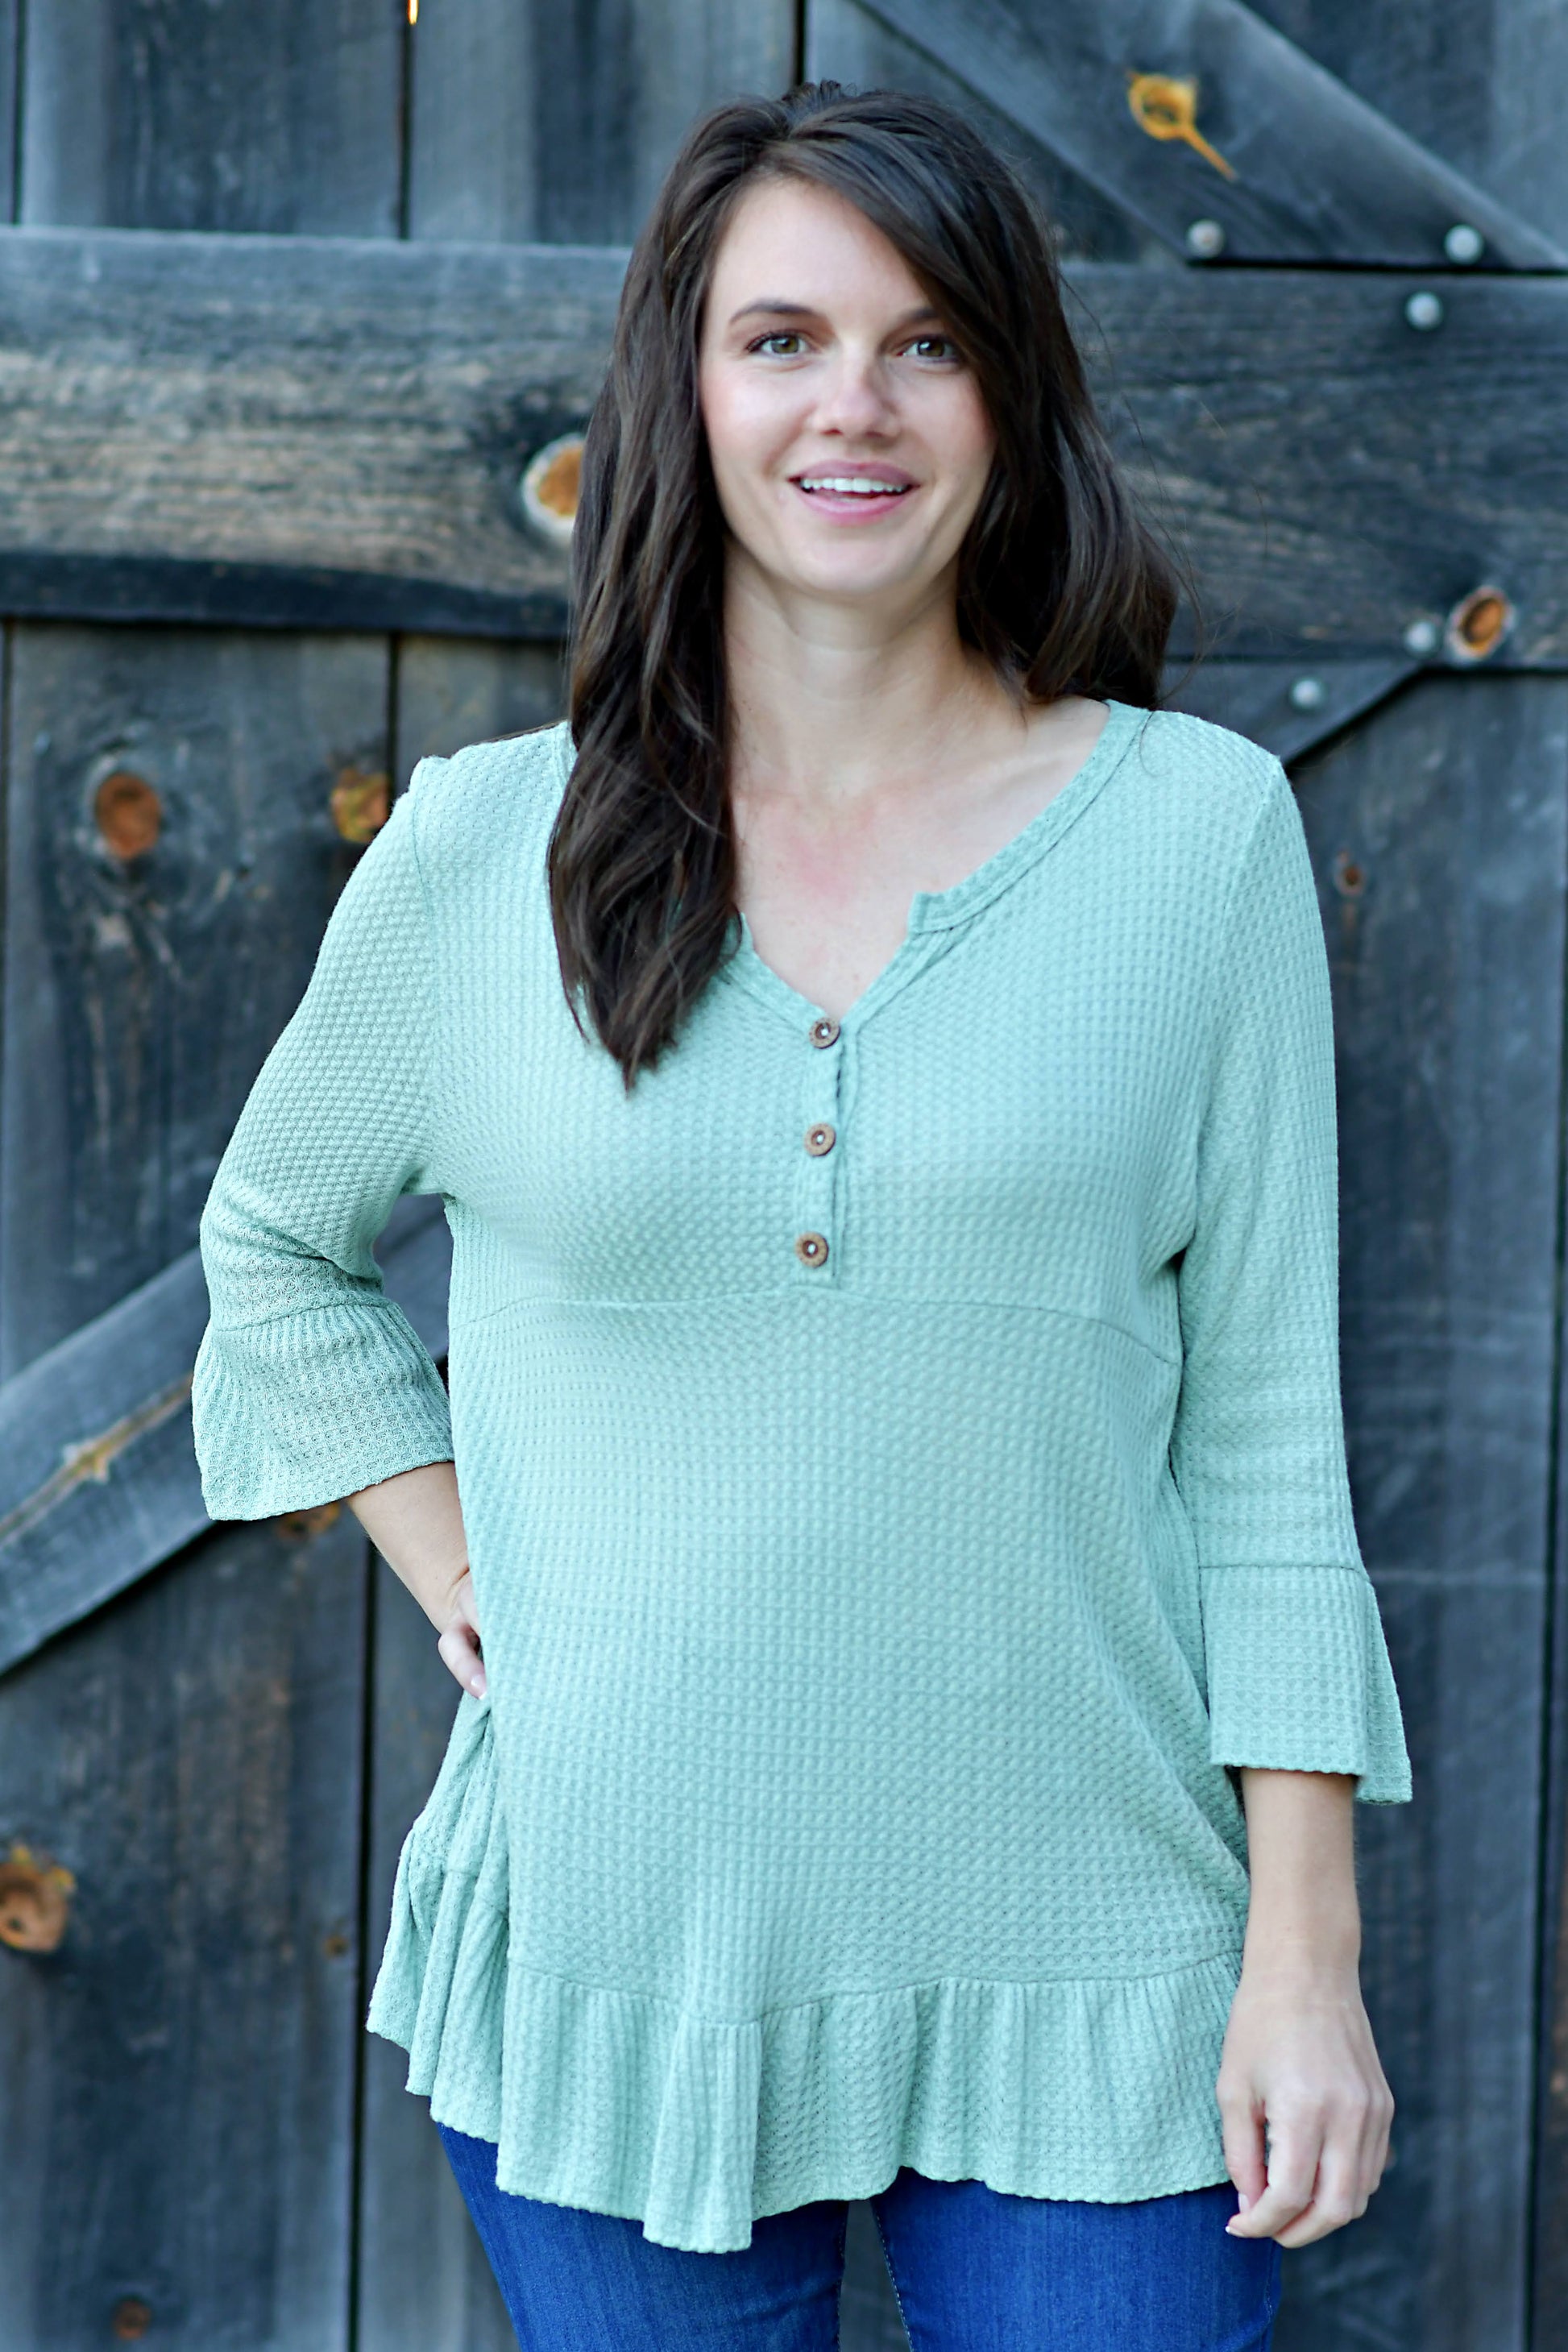 Just Think It Through Gray Tunic Sweater Dress – Shop the Mint